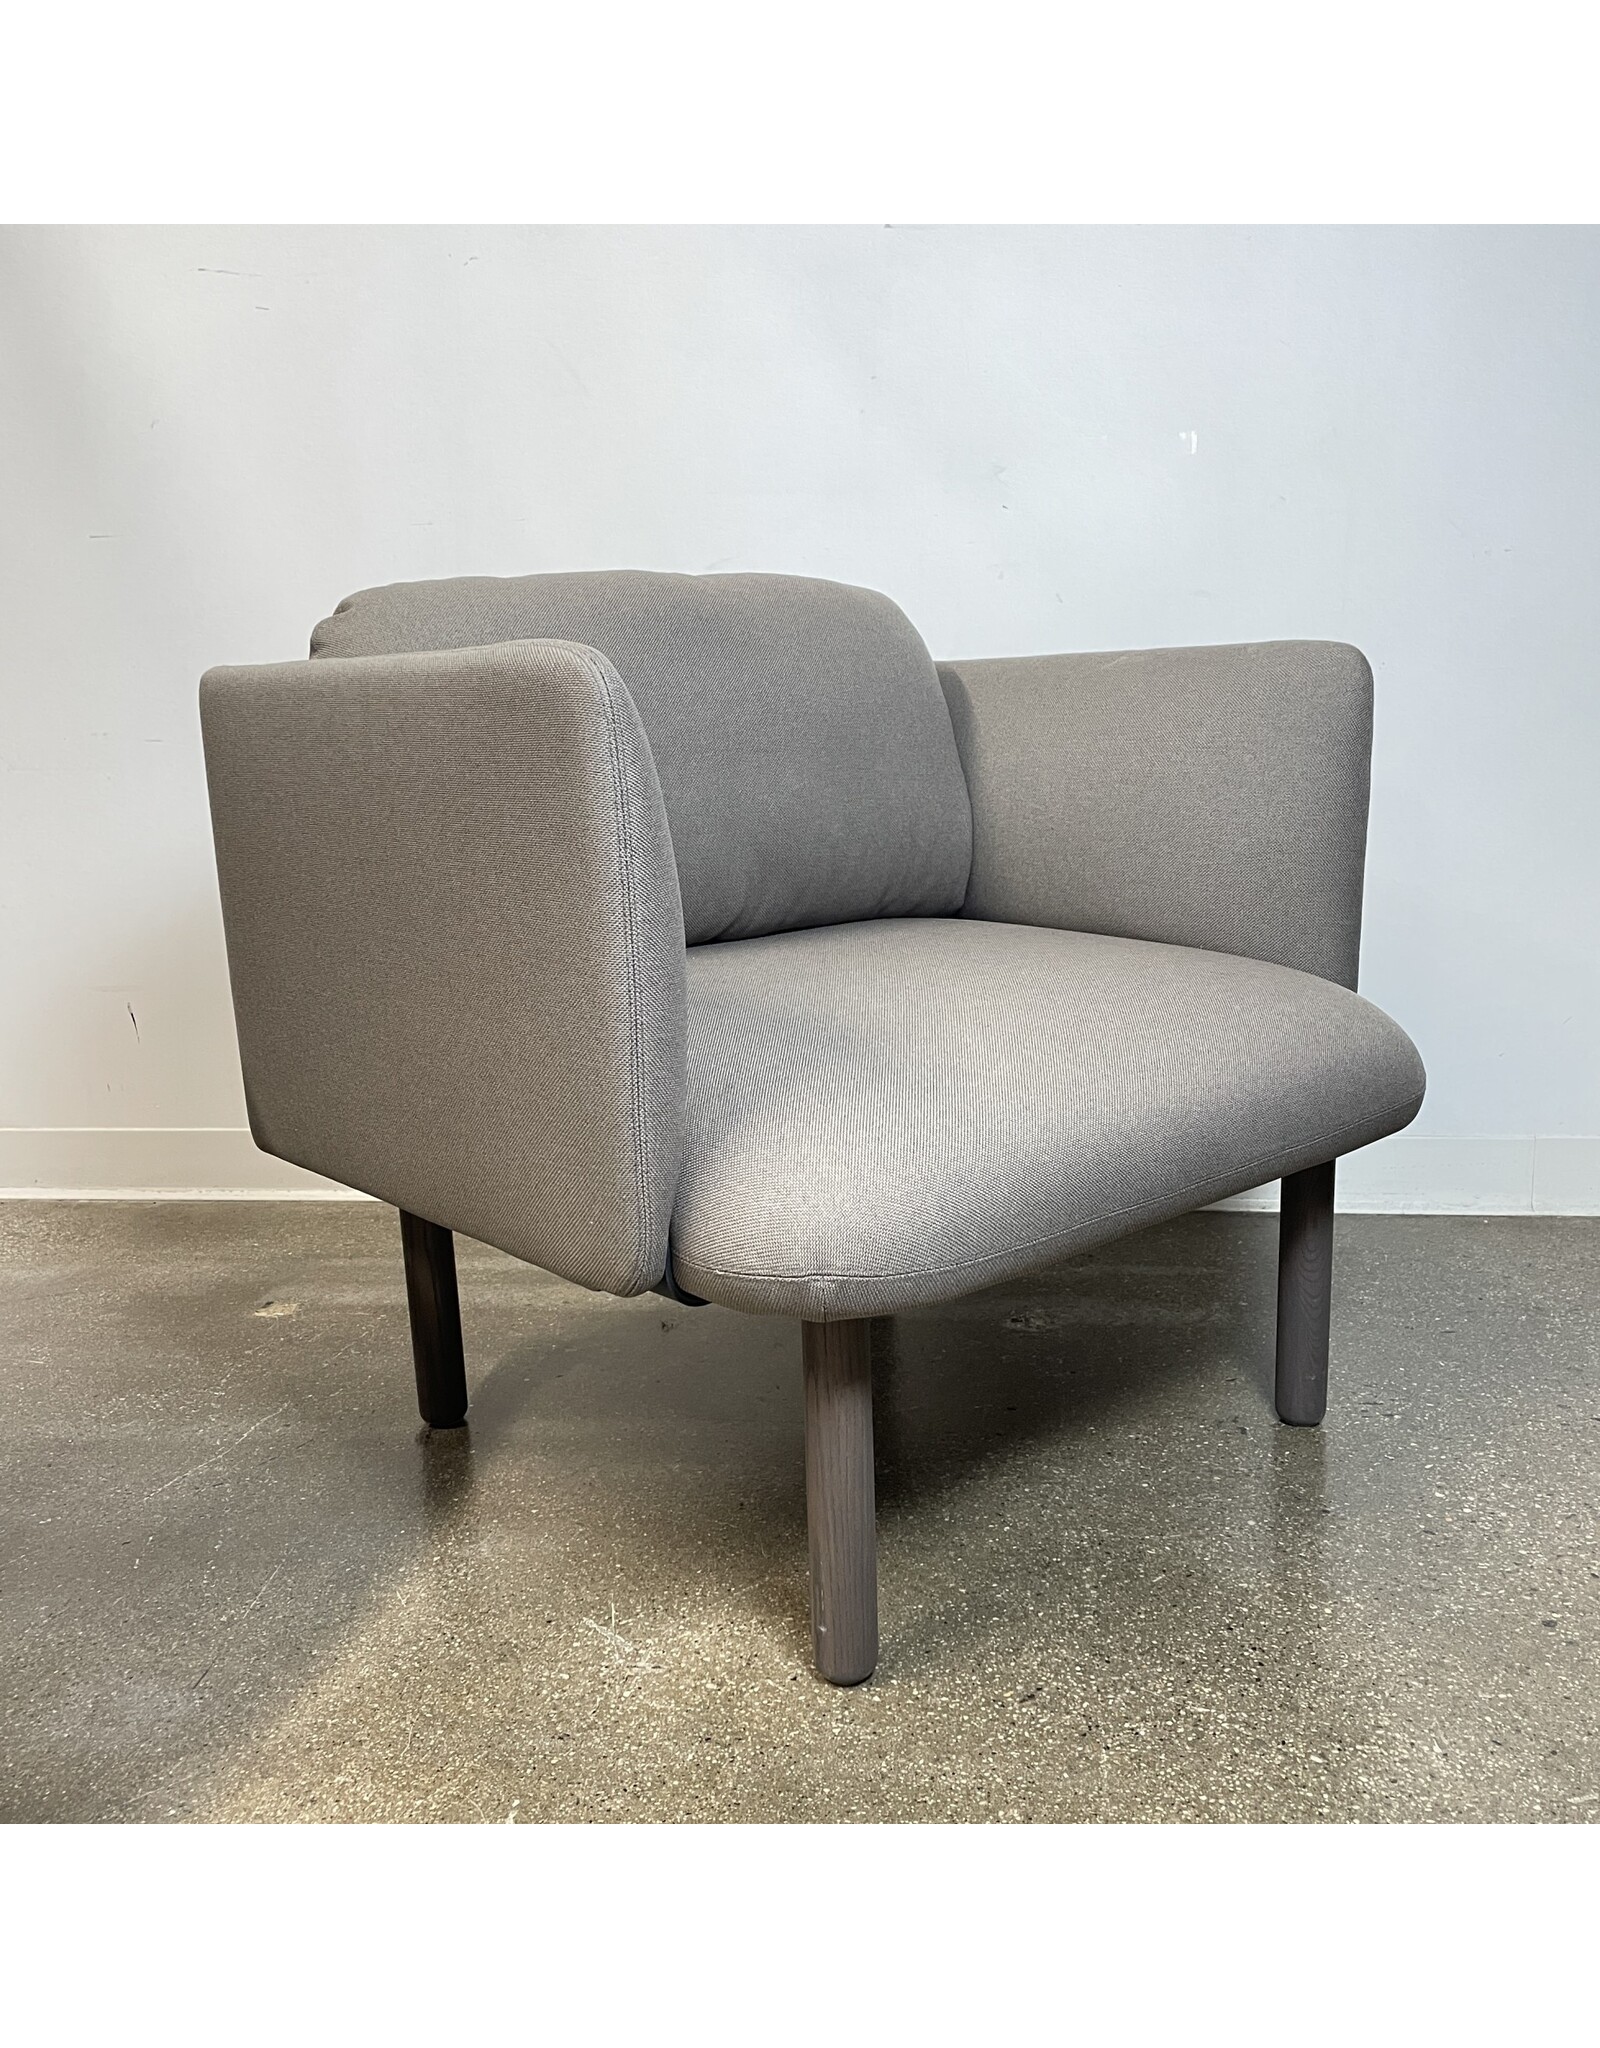 Poppin Poppin Low QT Lounge Chair in Gray